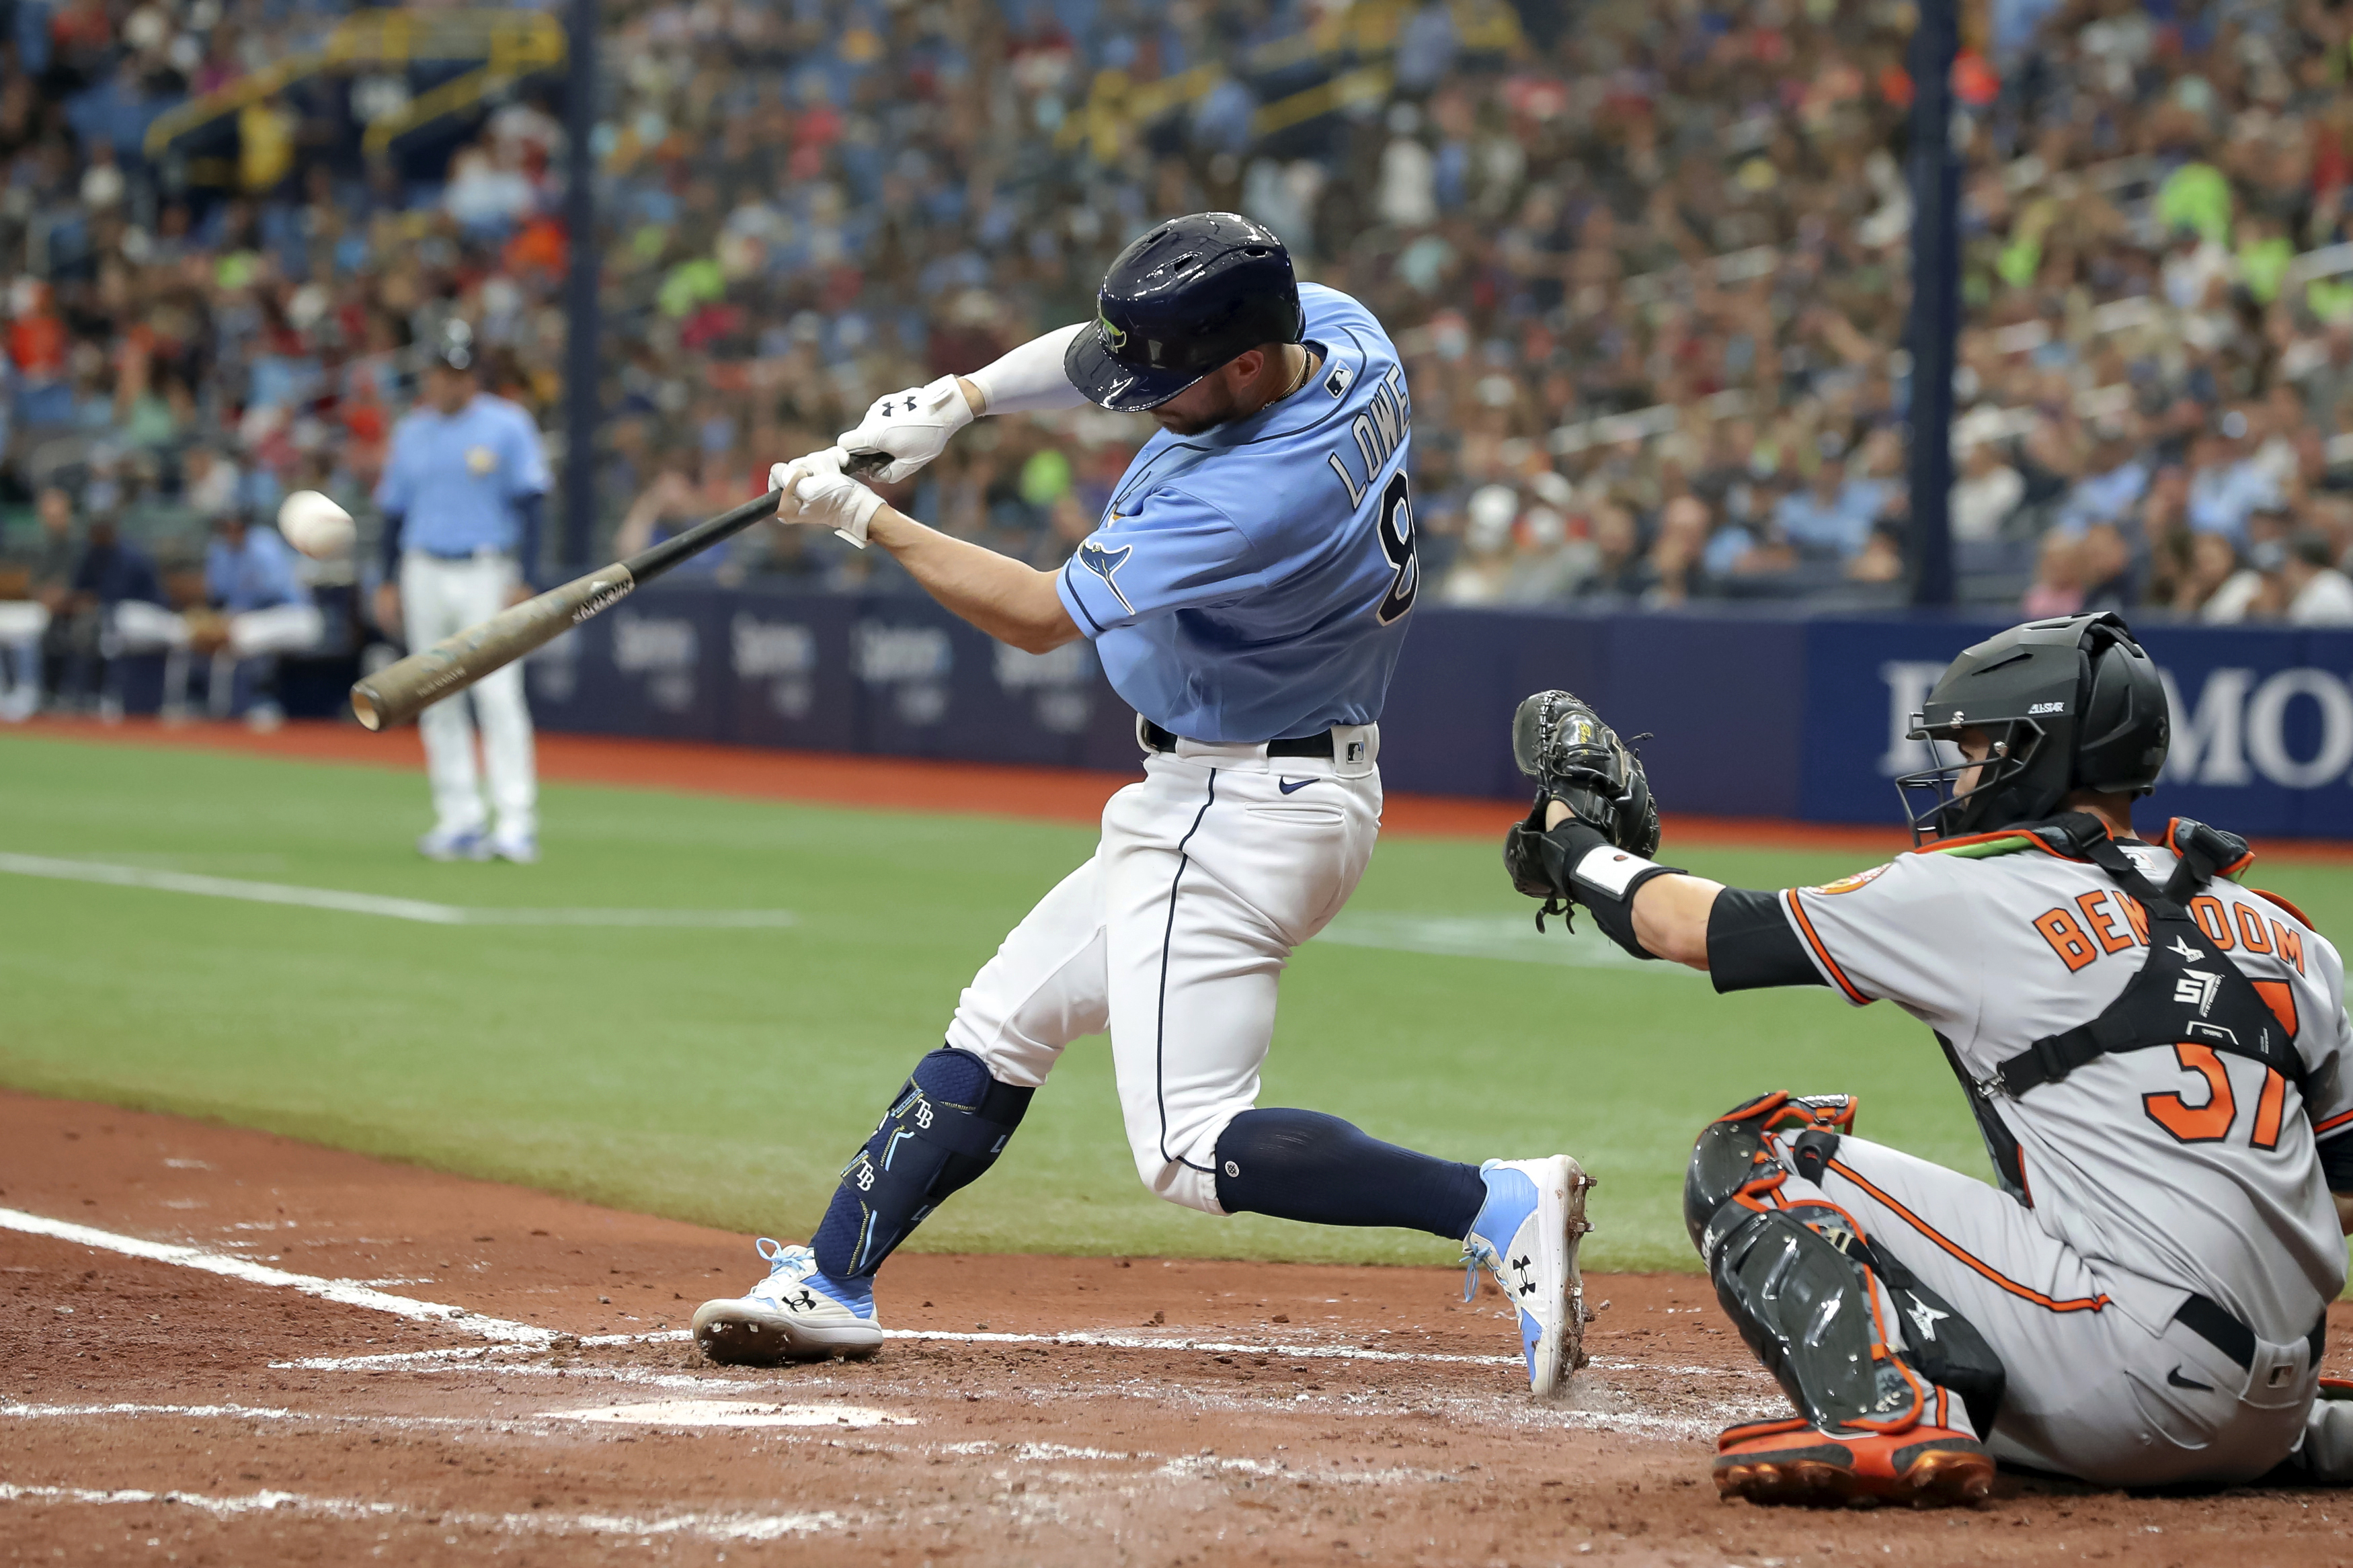 Kluber looks good, Rays beat Orioles 8-0 to complete sweep